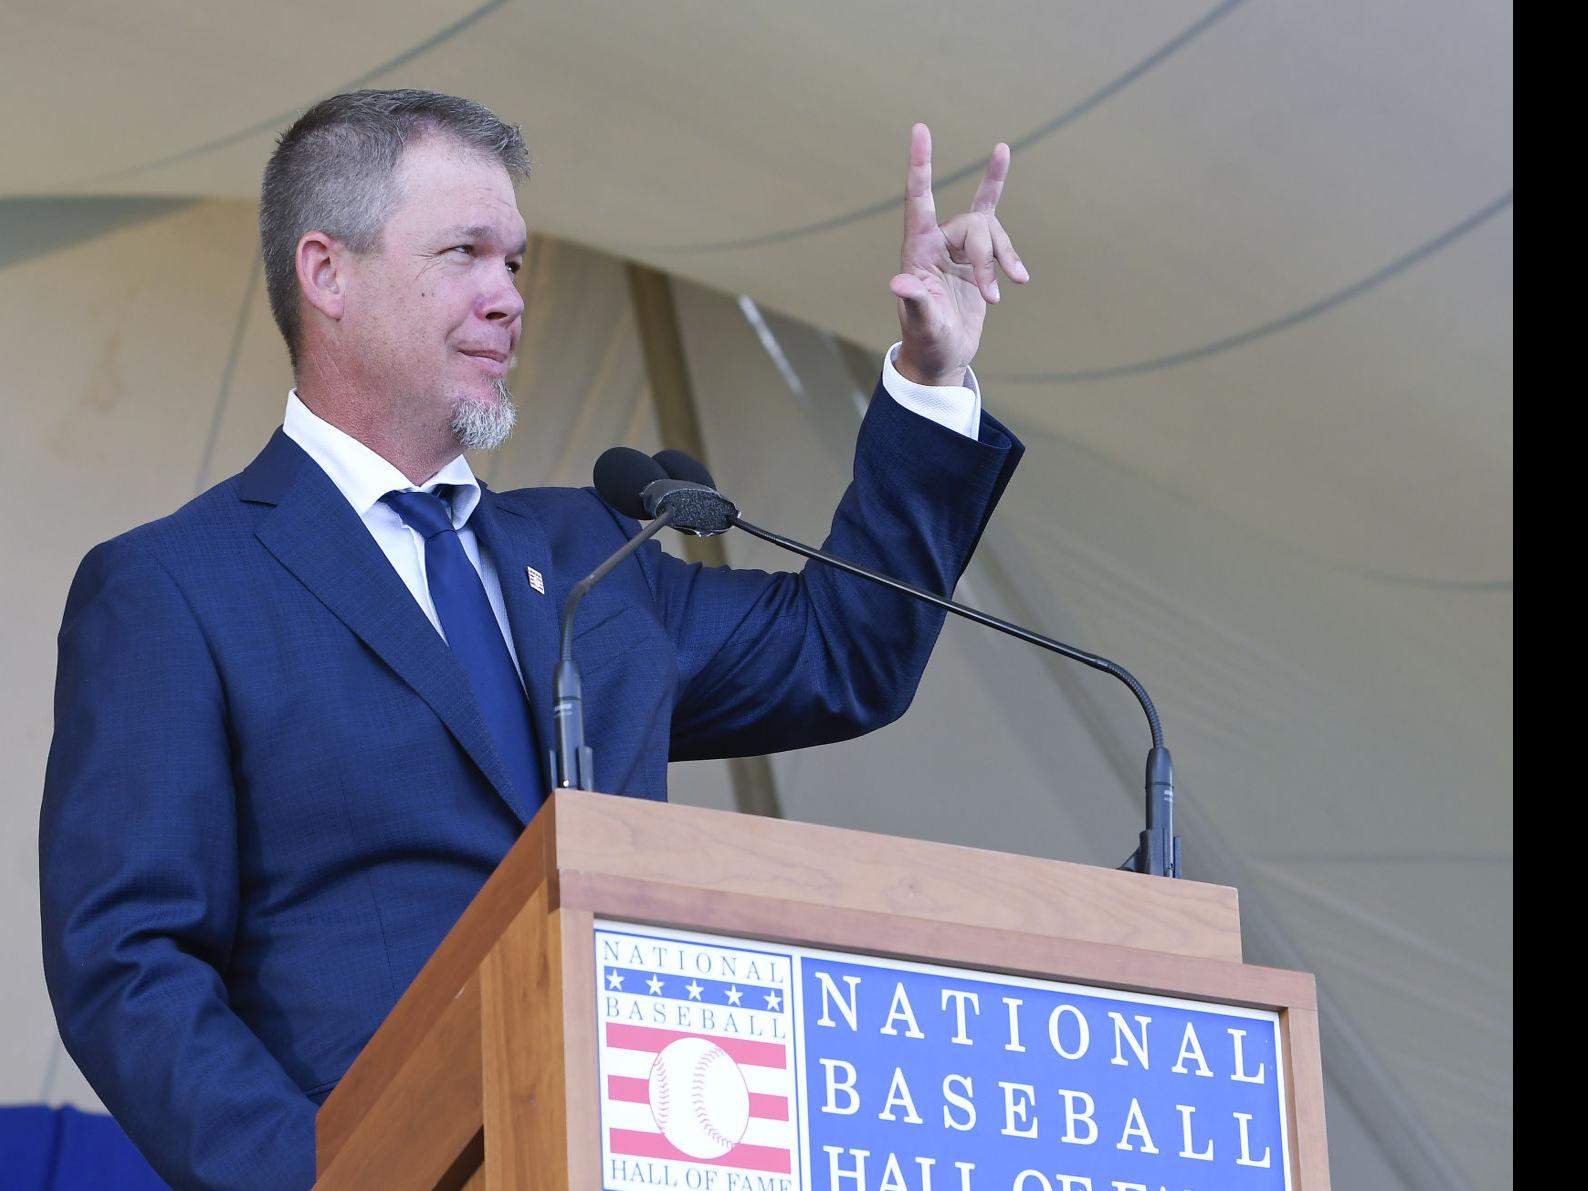 Here's why Chipper Jones might not deliver his Hall of Fame speech